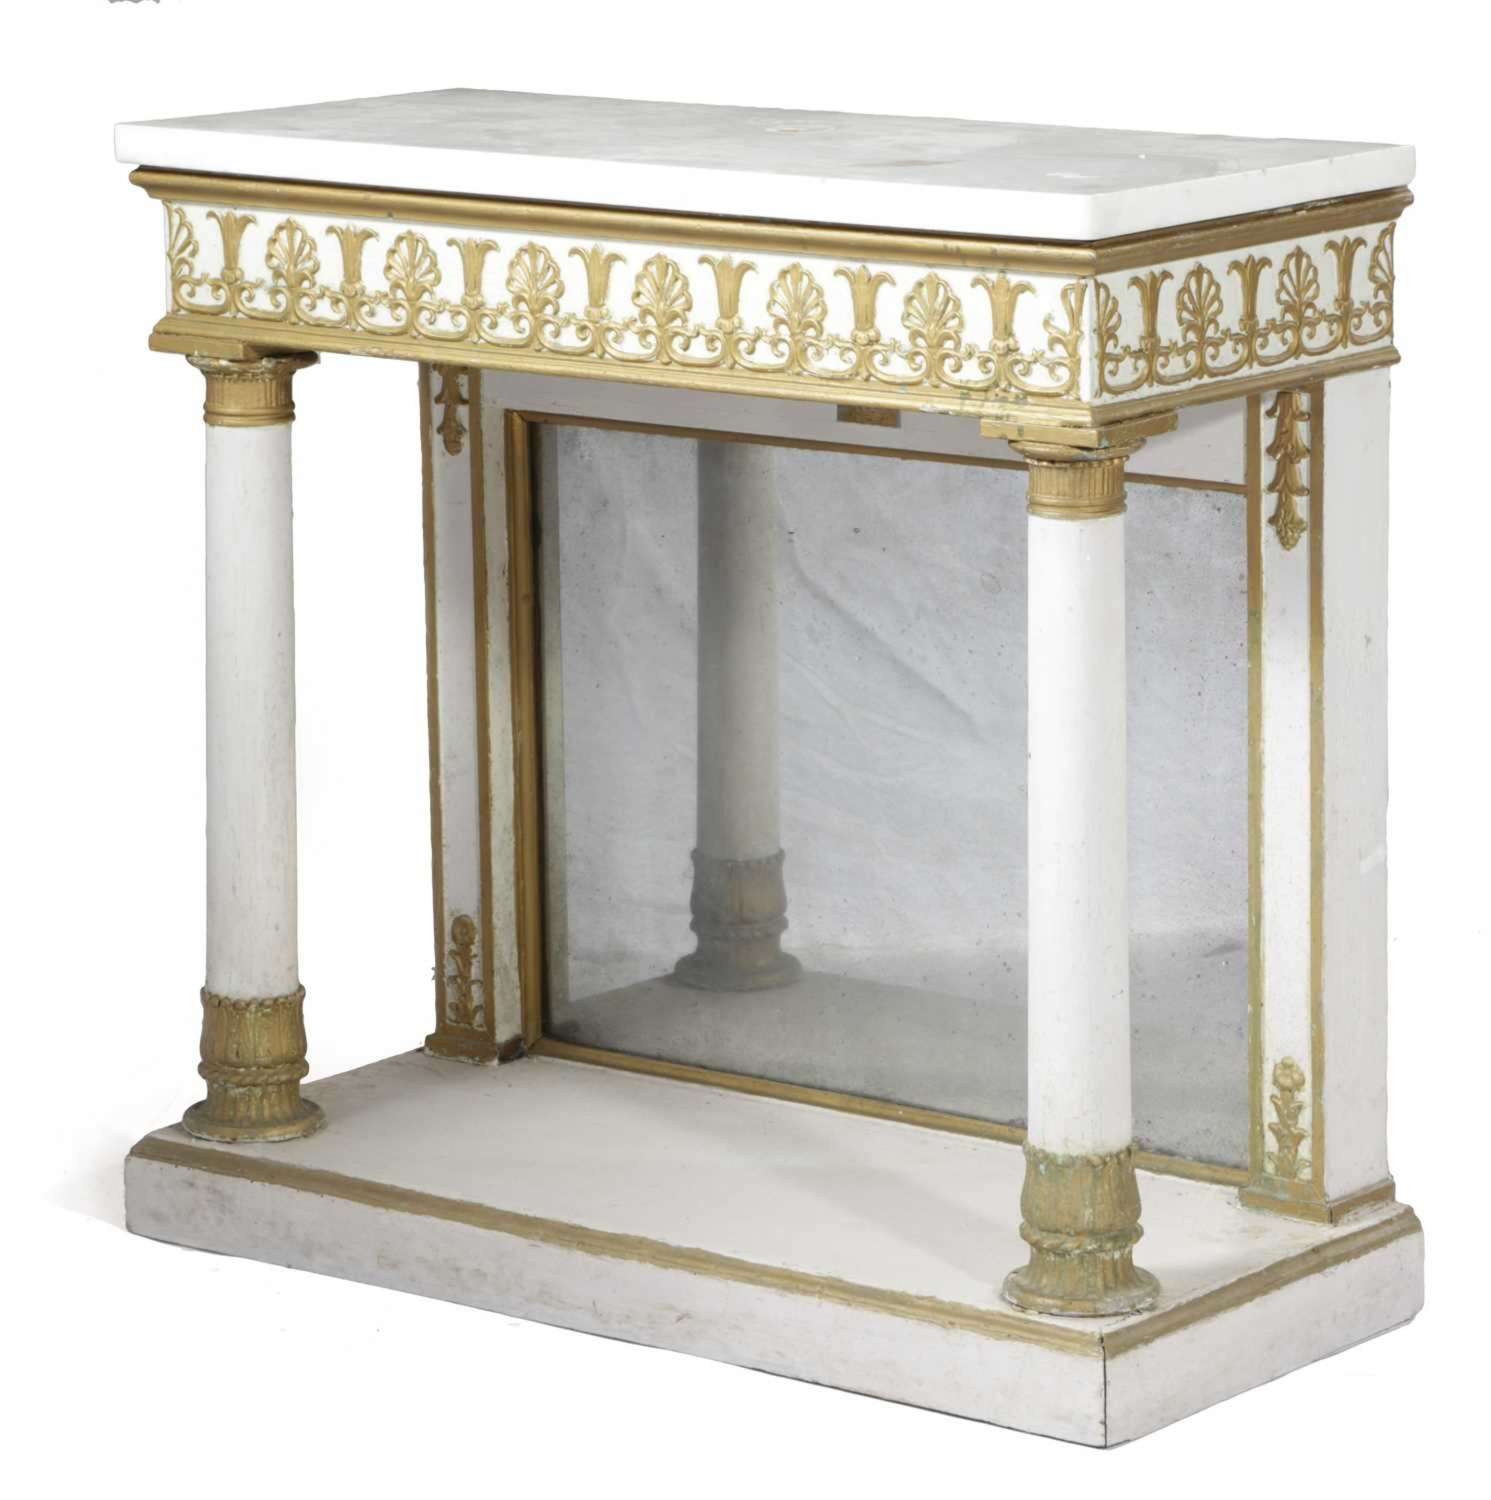 A PAINTED PINE AND PARCEL GILT CONSOLE TABLE